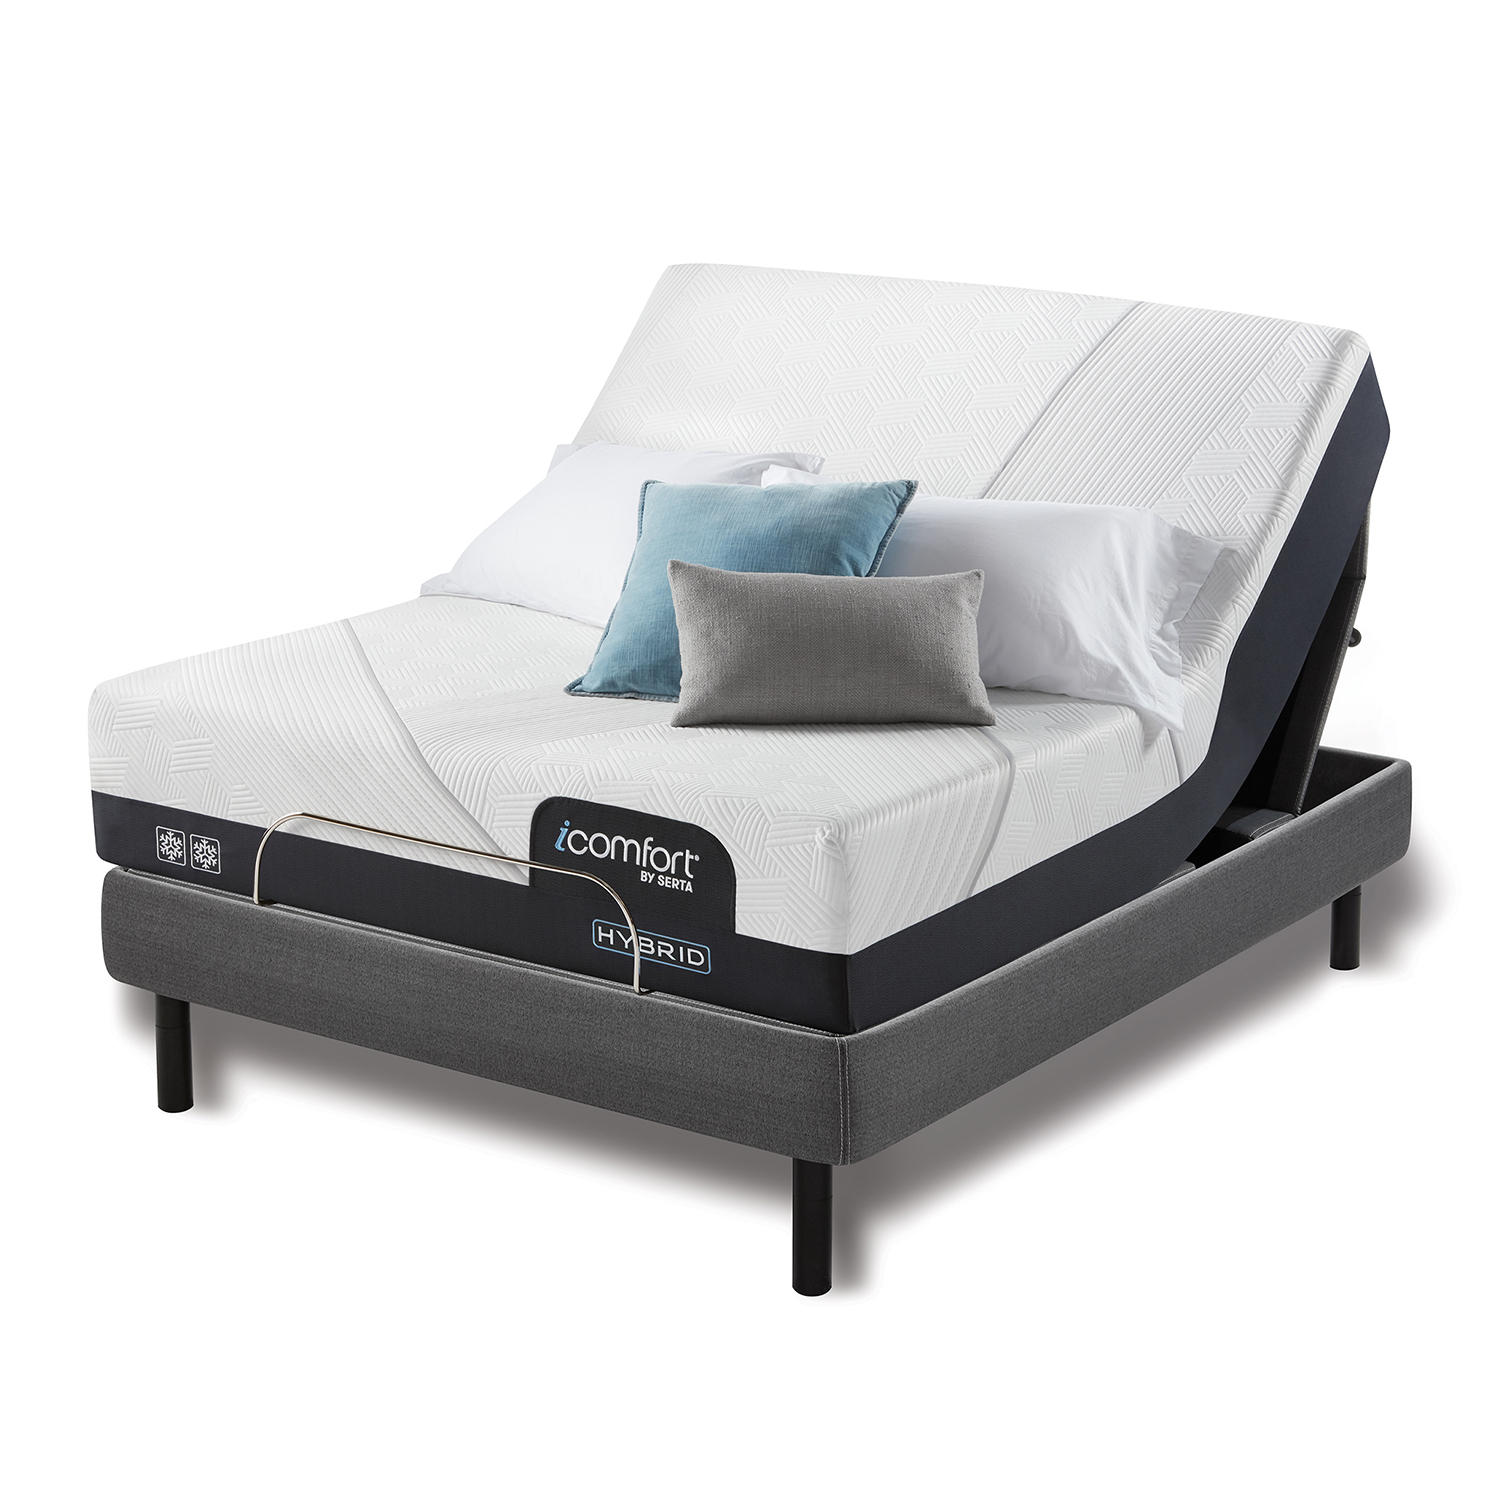 Up to $800 off Mattresses